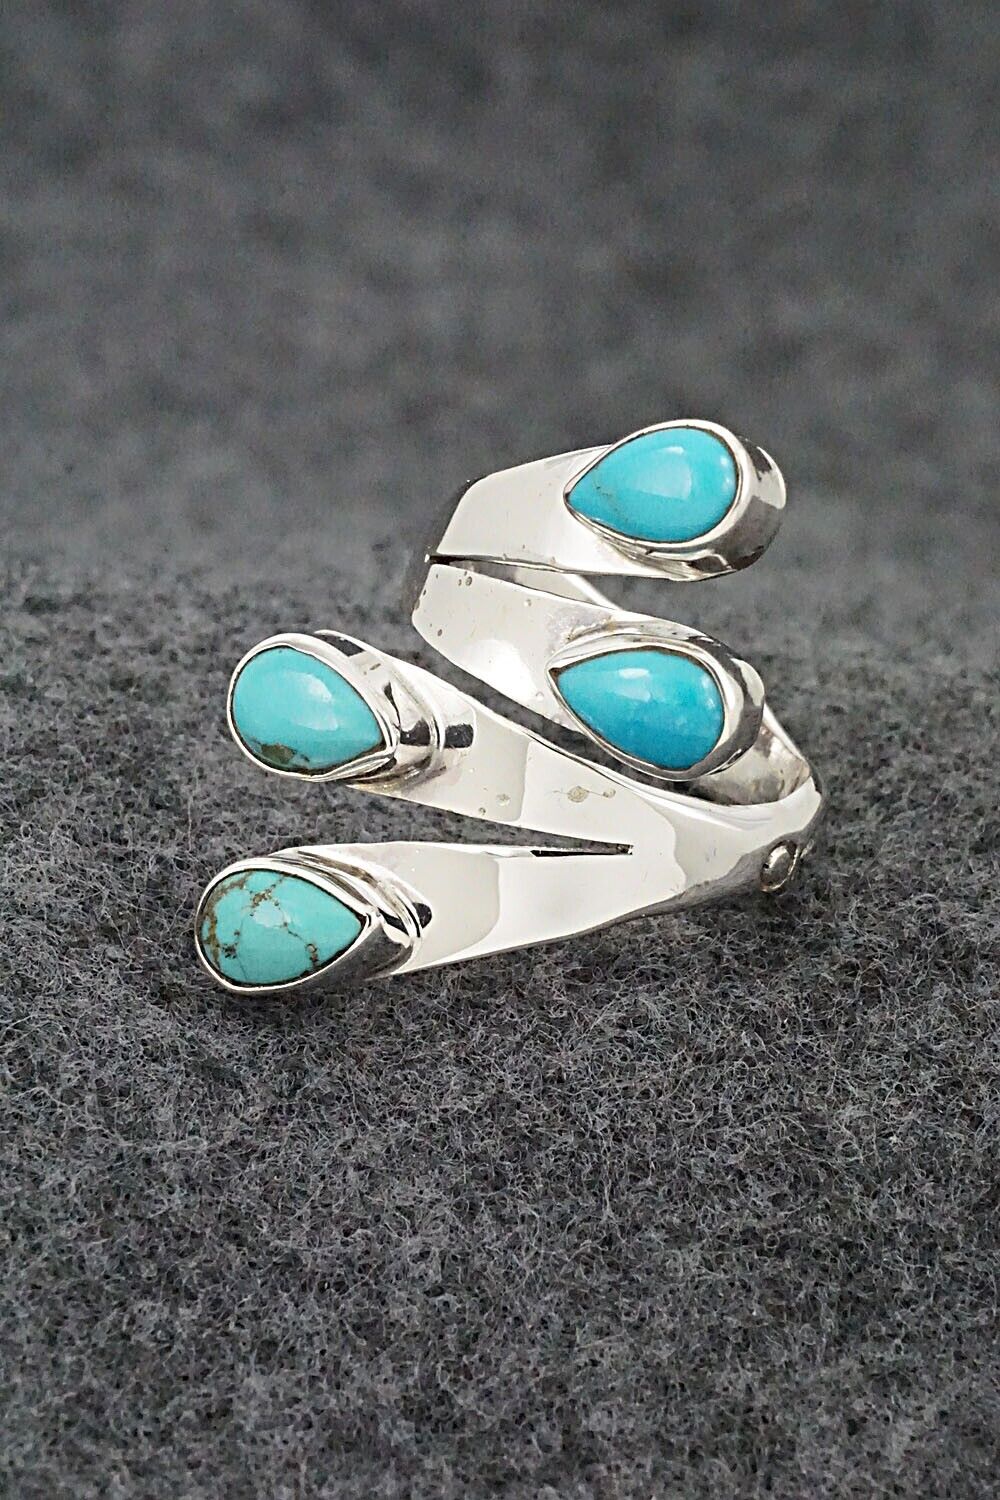 Turquoise & Sterling Silver Ring - Thomas Yazzie - Size 6.5